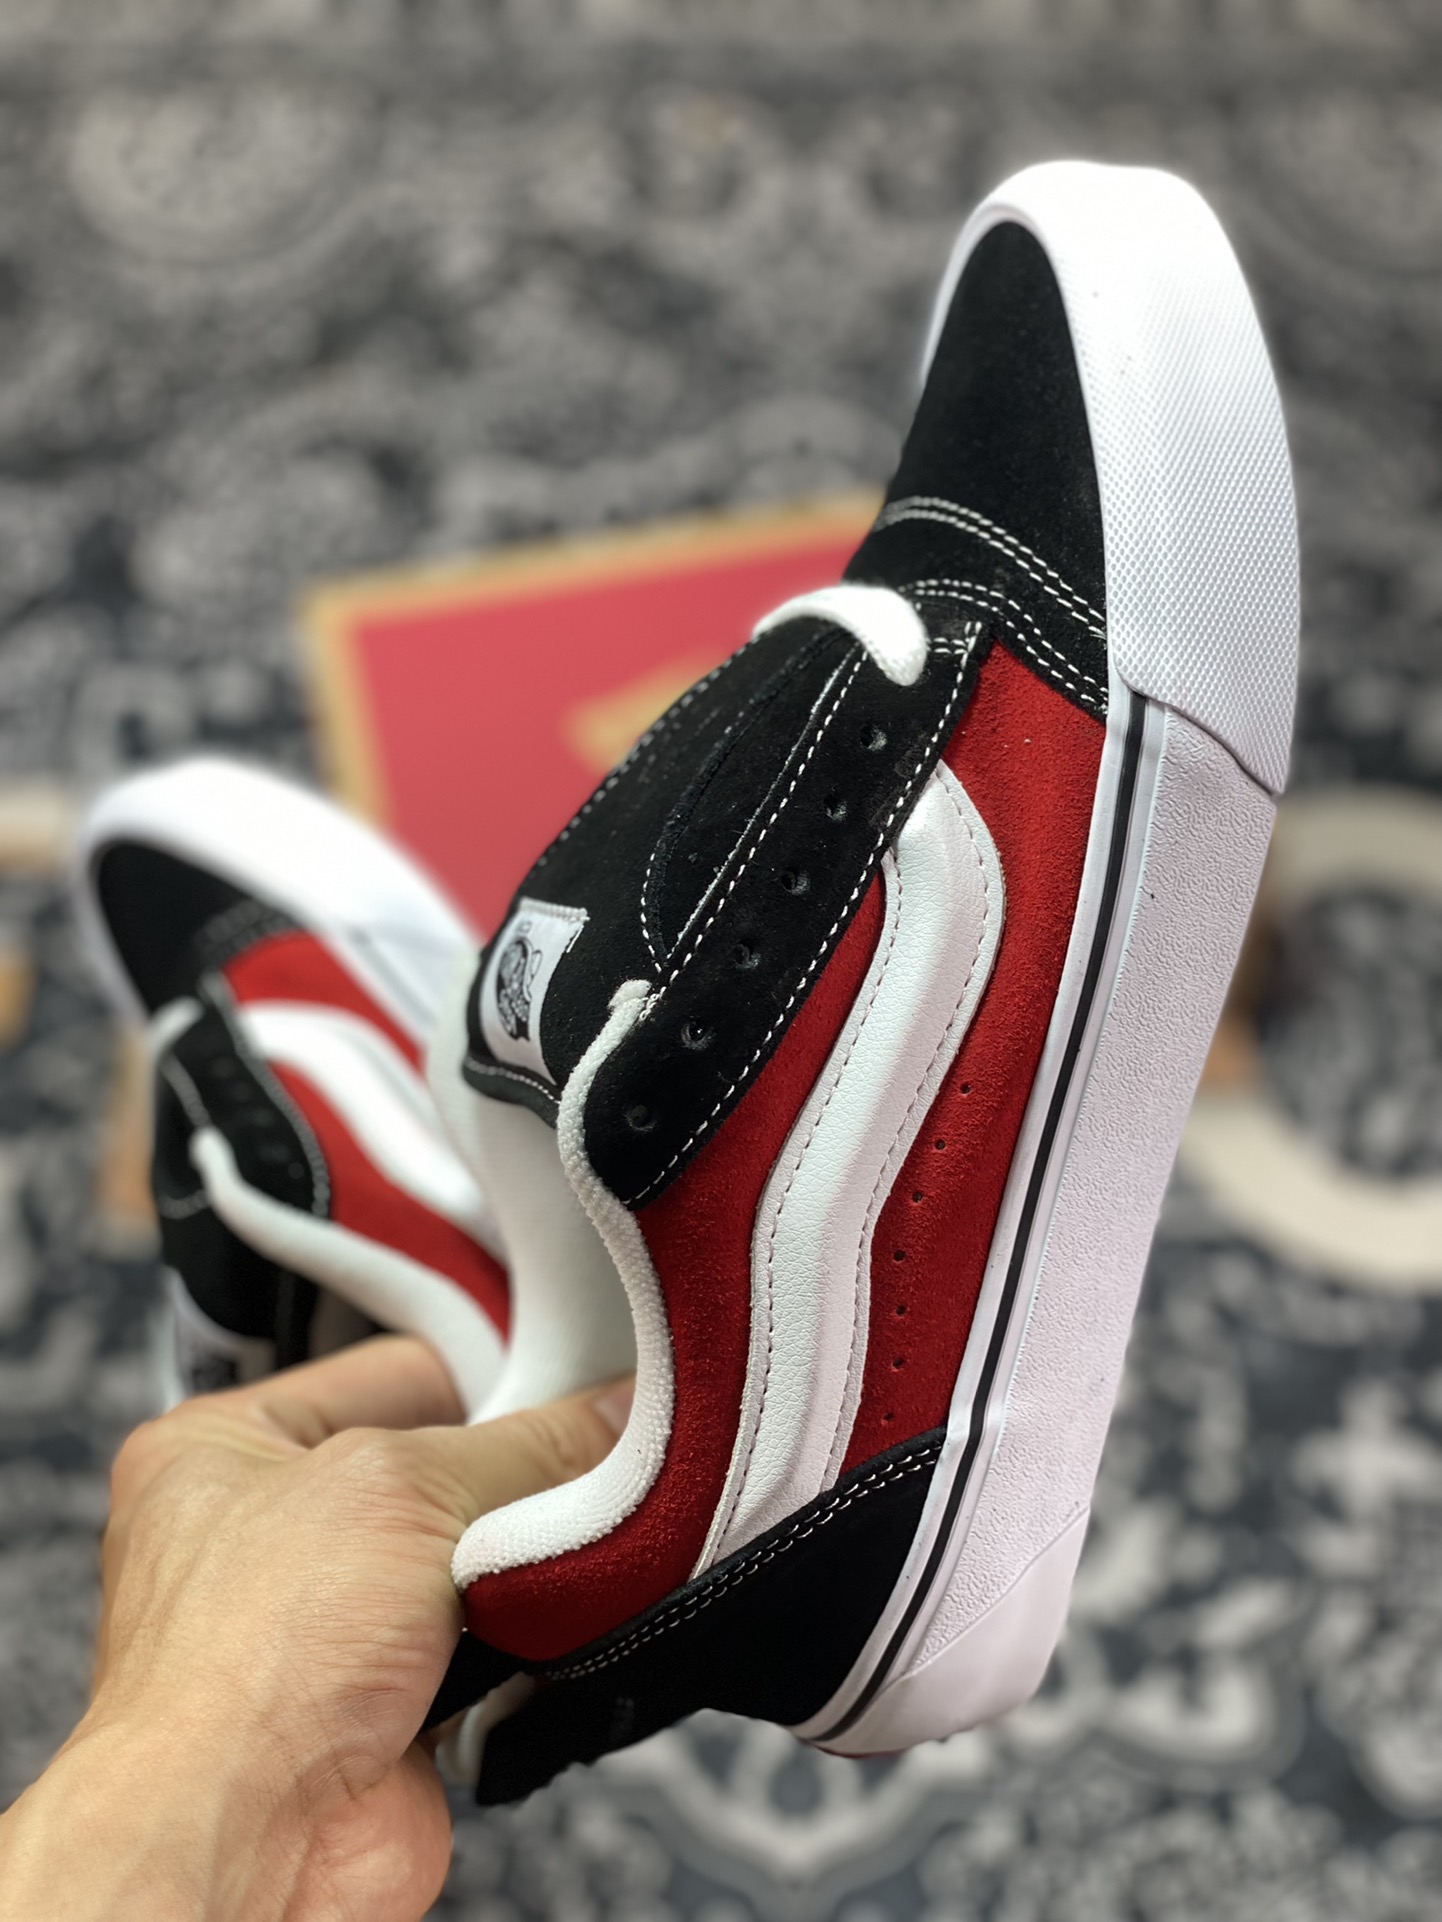 Vans Knu-Skool VR3 LX bread shoes black and red stitching low-top retro casual vulcanized sneakers